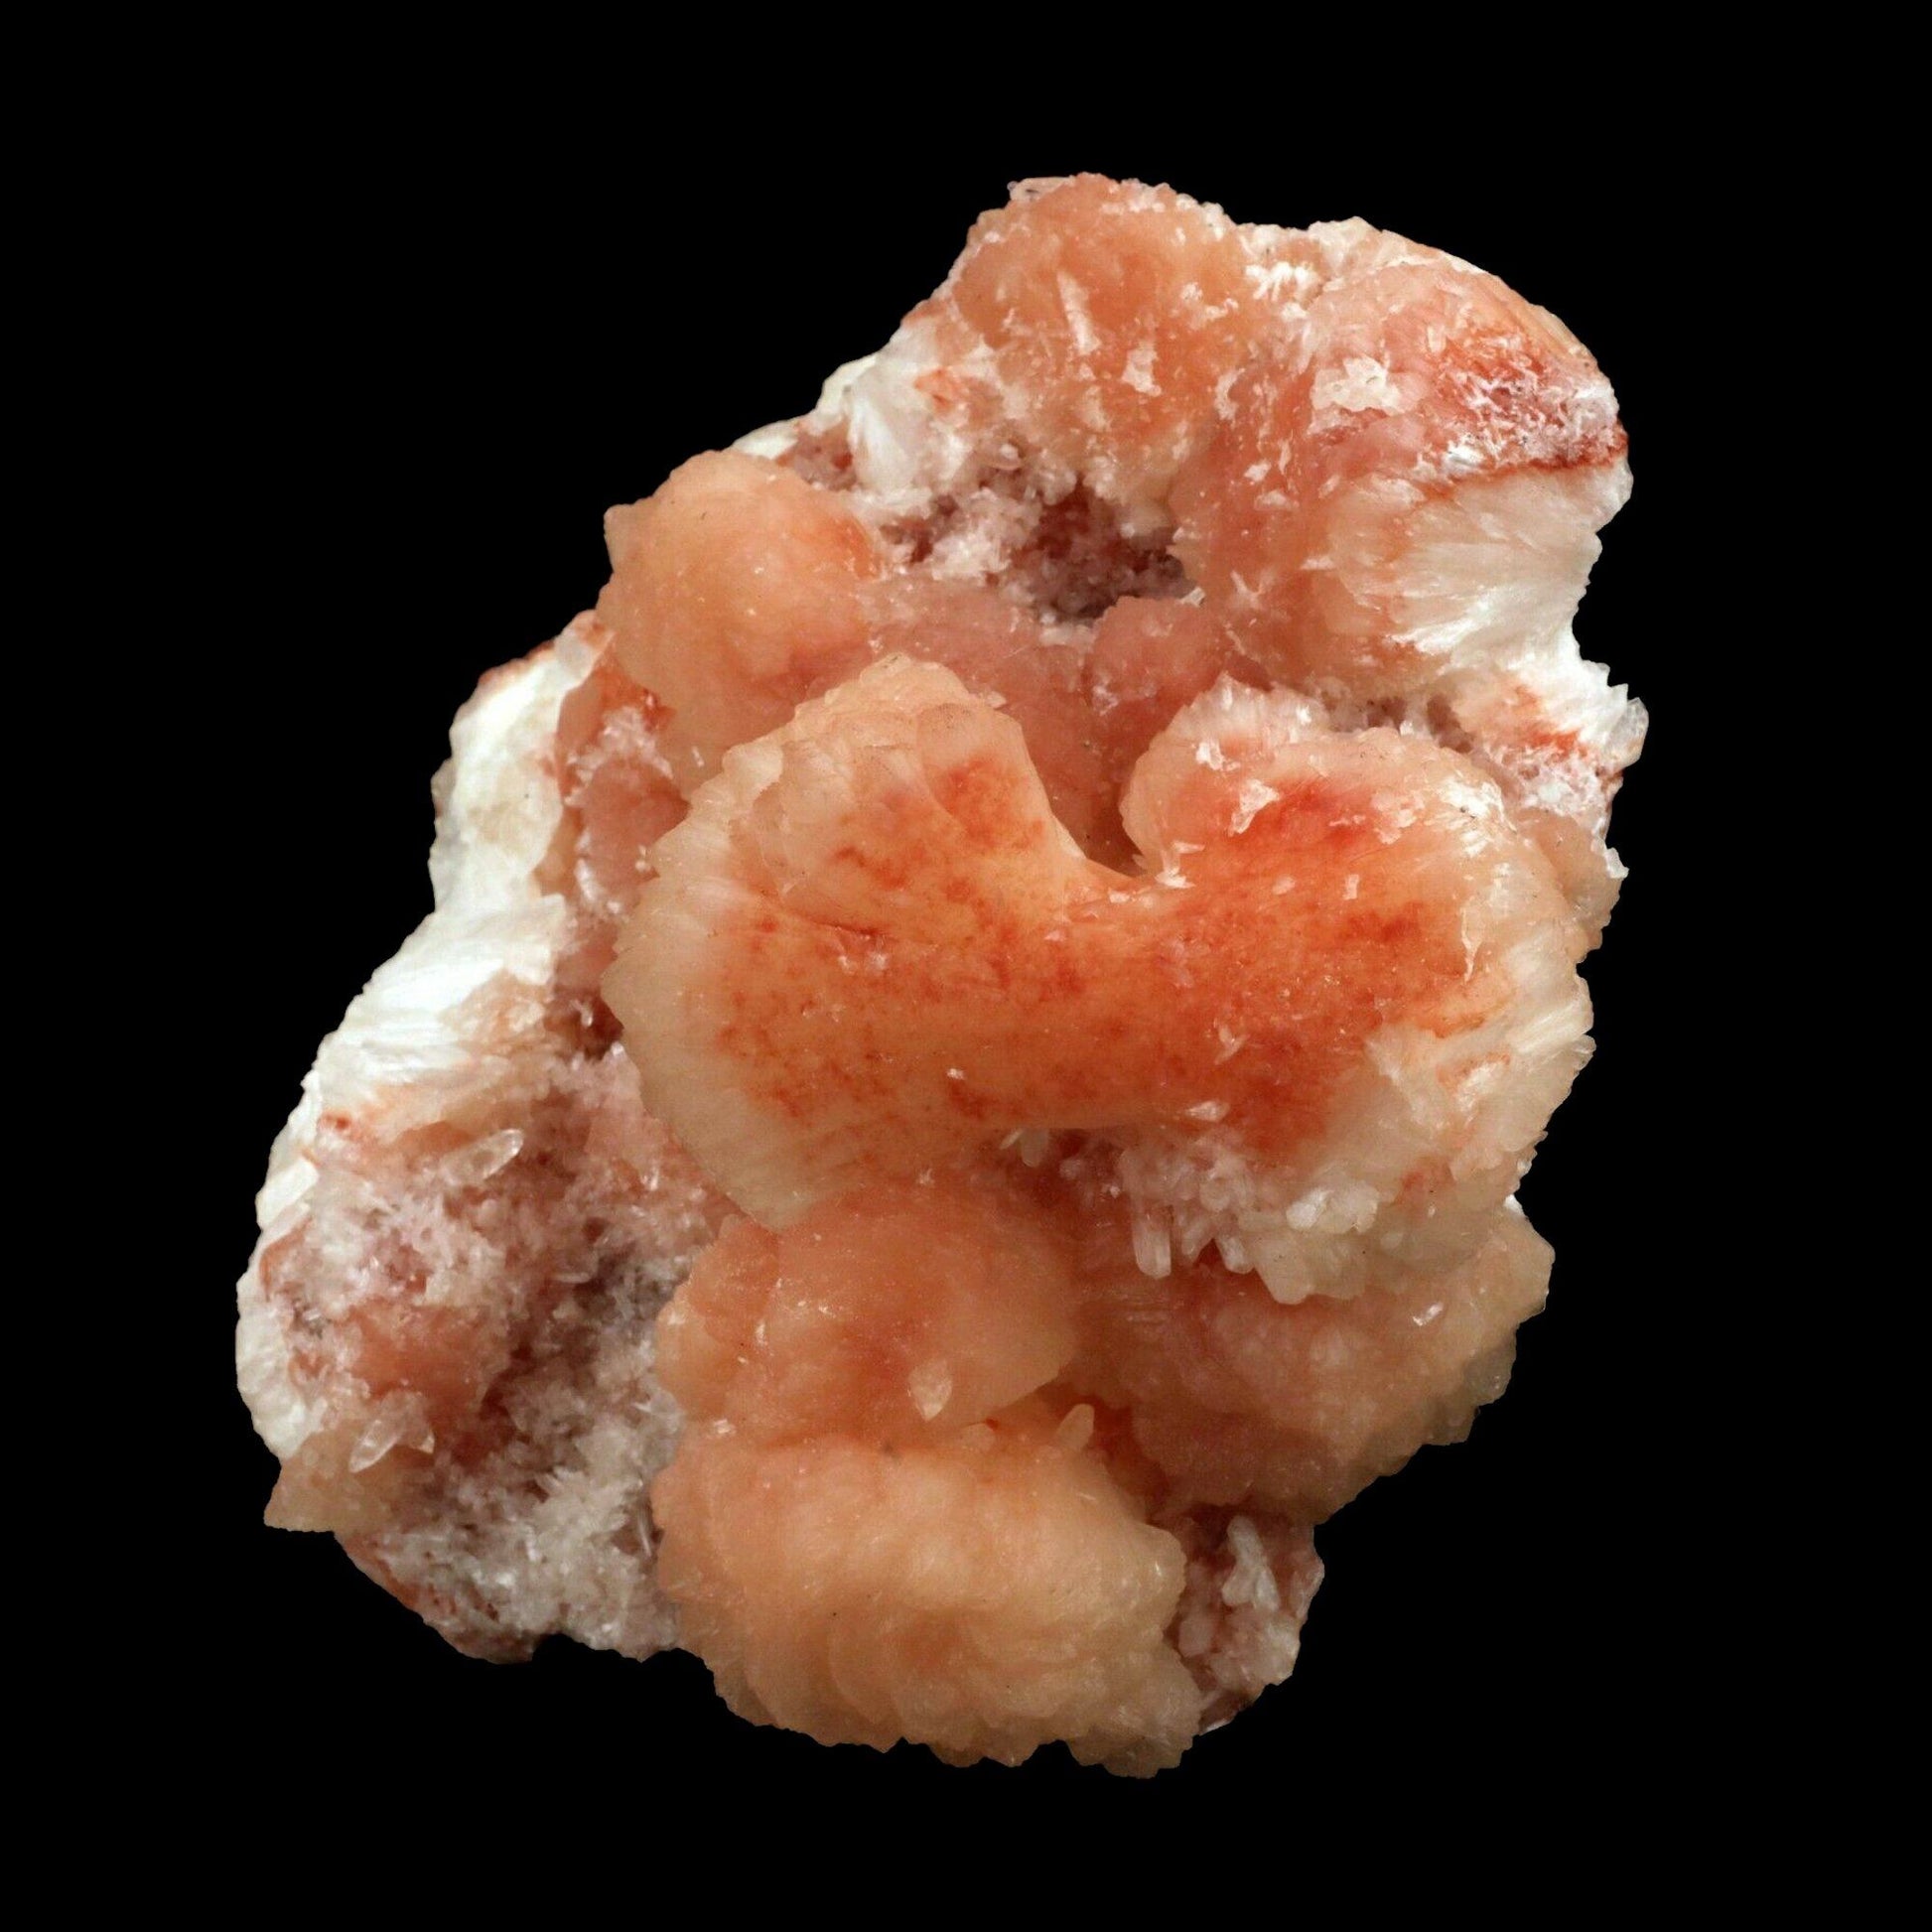 Stilbite Bow Shape Pink crystal Natural Mineral Specimen # B 2892  https://www.superbminerals.us/products/stilbite-bow-shape-pink-crystal-natural-mineral-specimen-b-2892  Features:It features a large aggregate of numerous “bowtie” shaped, translucent and lustrous pink/oramge colored Stilbite crystals. The color of this Stilbite is not exactly the atypical salmon color, but as mentioned, it has a slight pink,orange hue to it that makes it a bit more unique. Primary Mineral(s): Stilbite